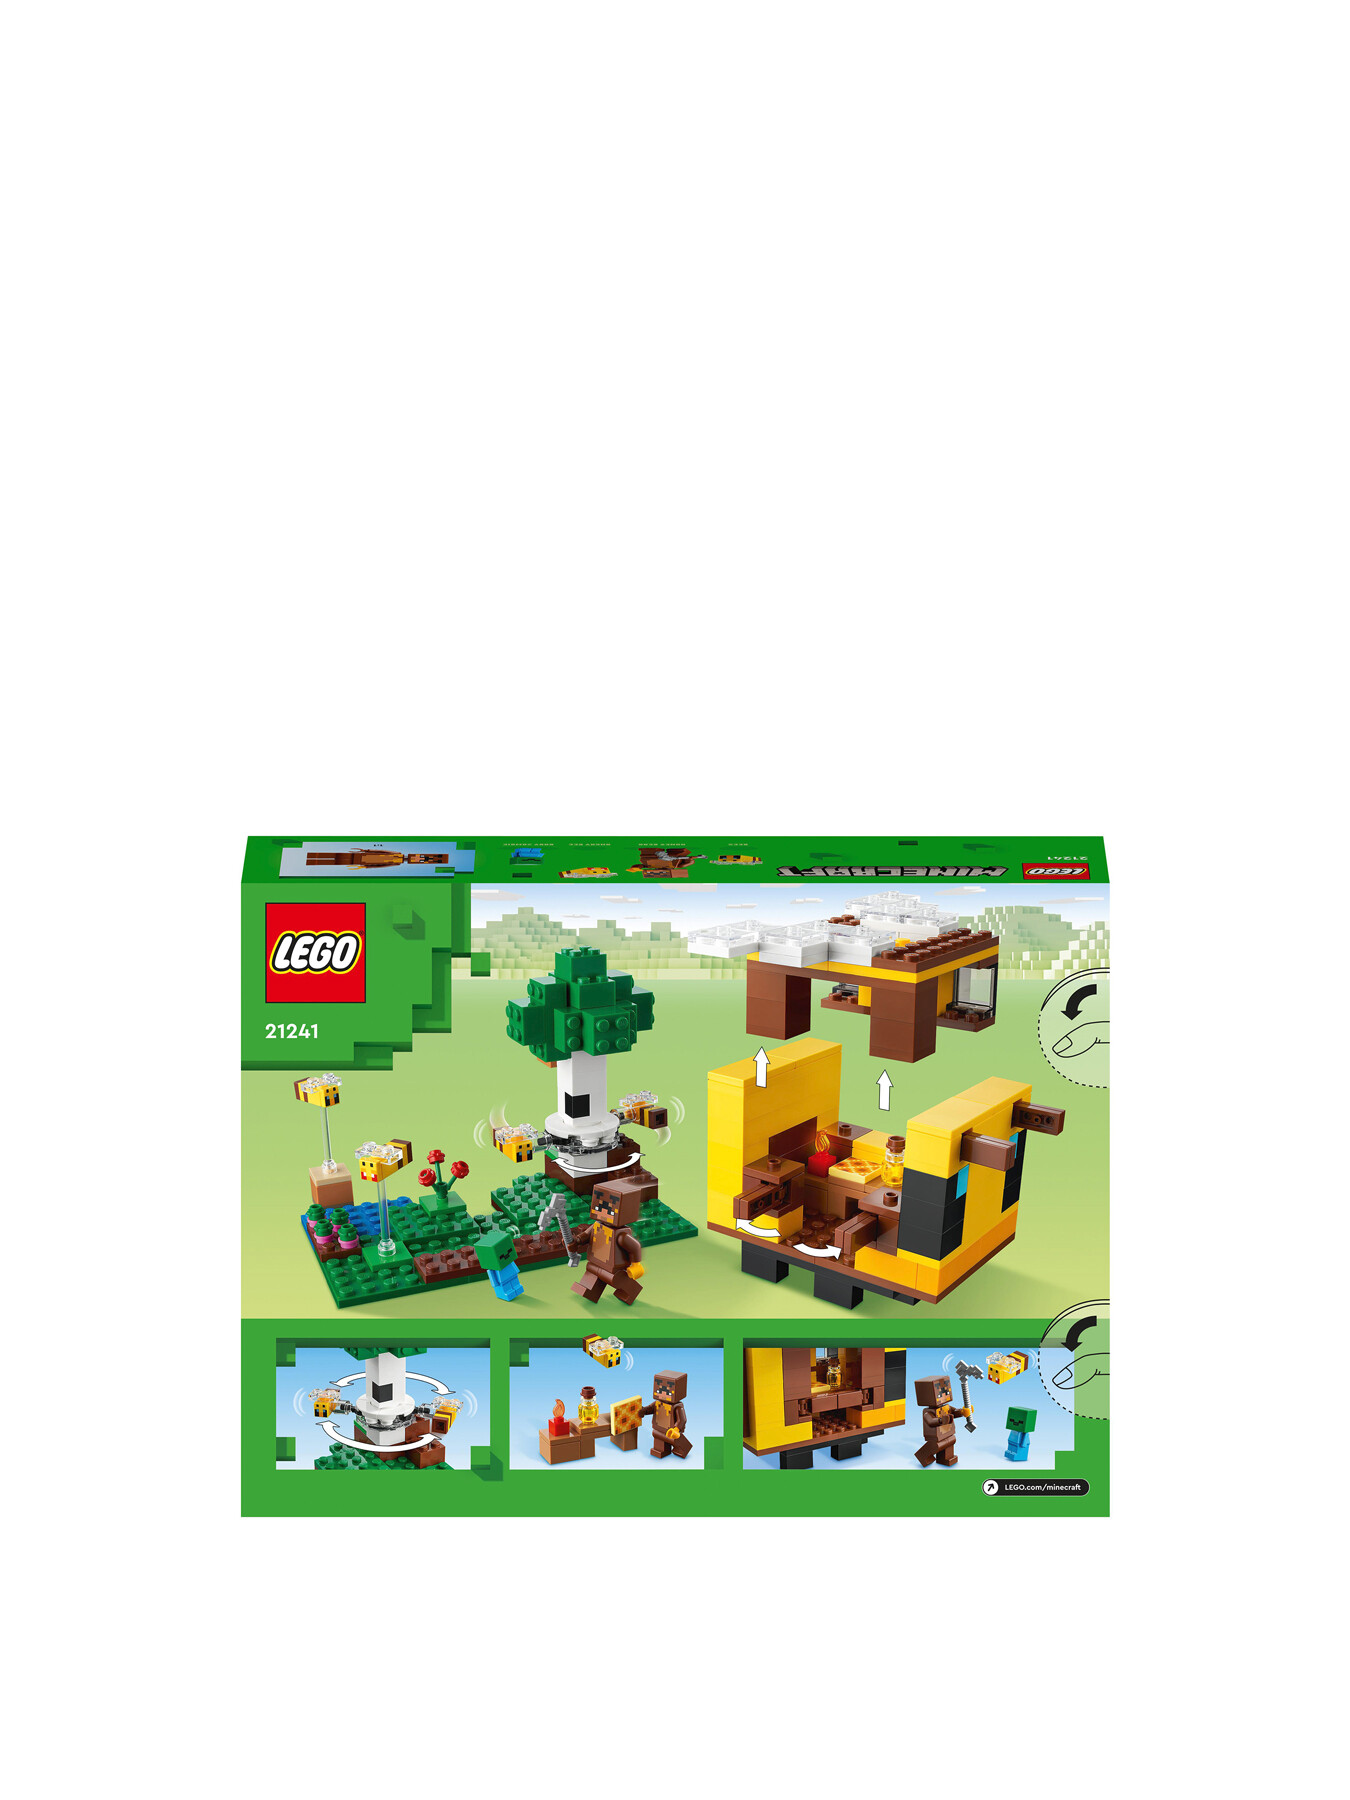 The Bee Cottage! LEGO Minecraft 21241 